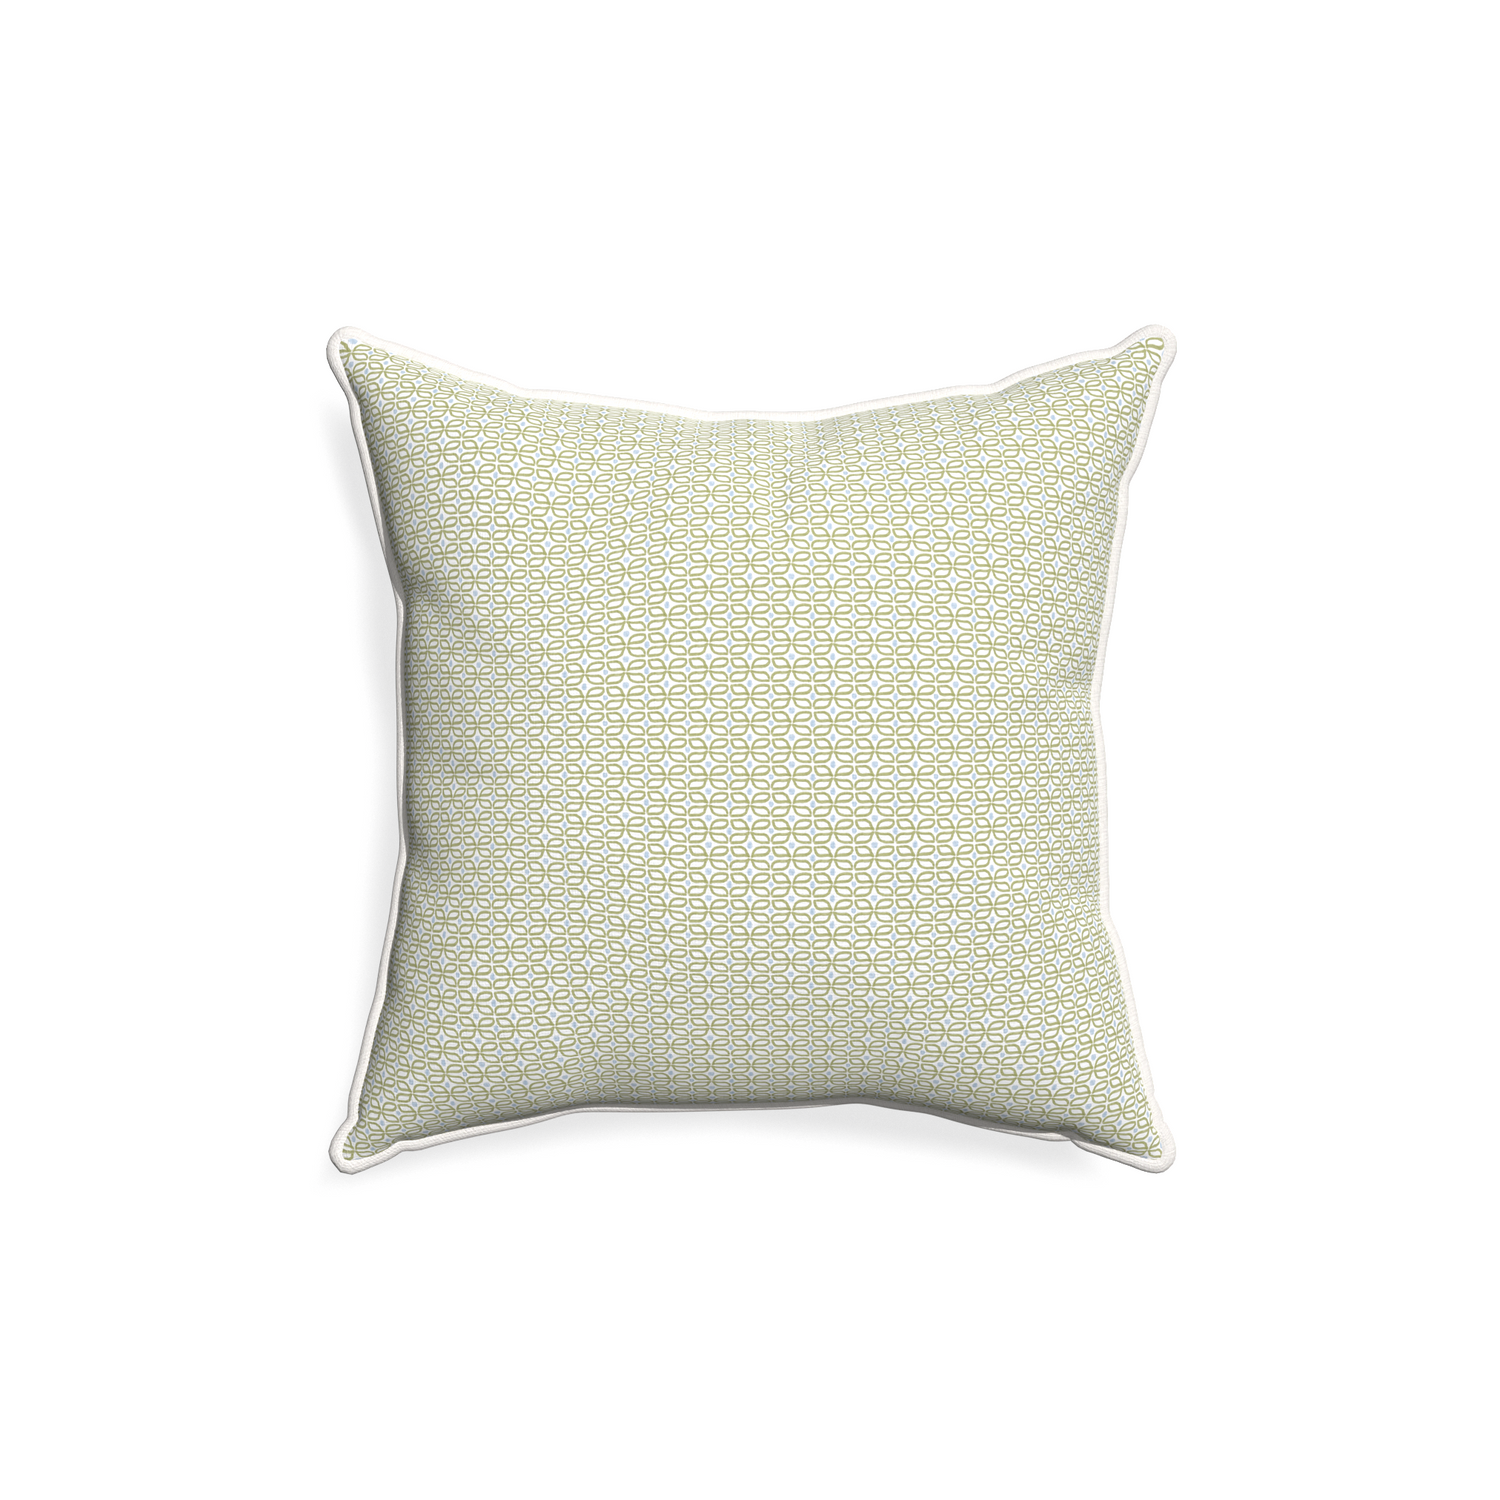 18-square loomi moss custom pillow with snow piping on white background